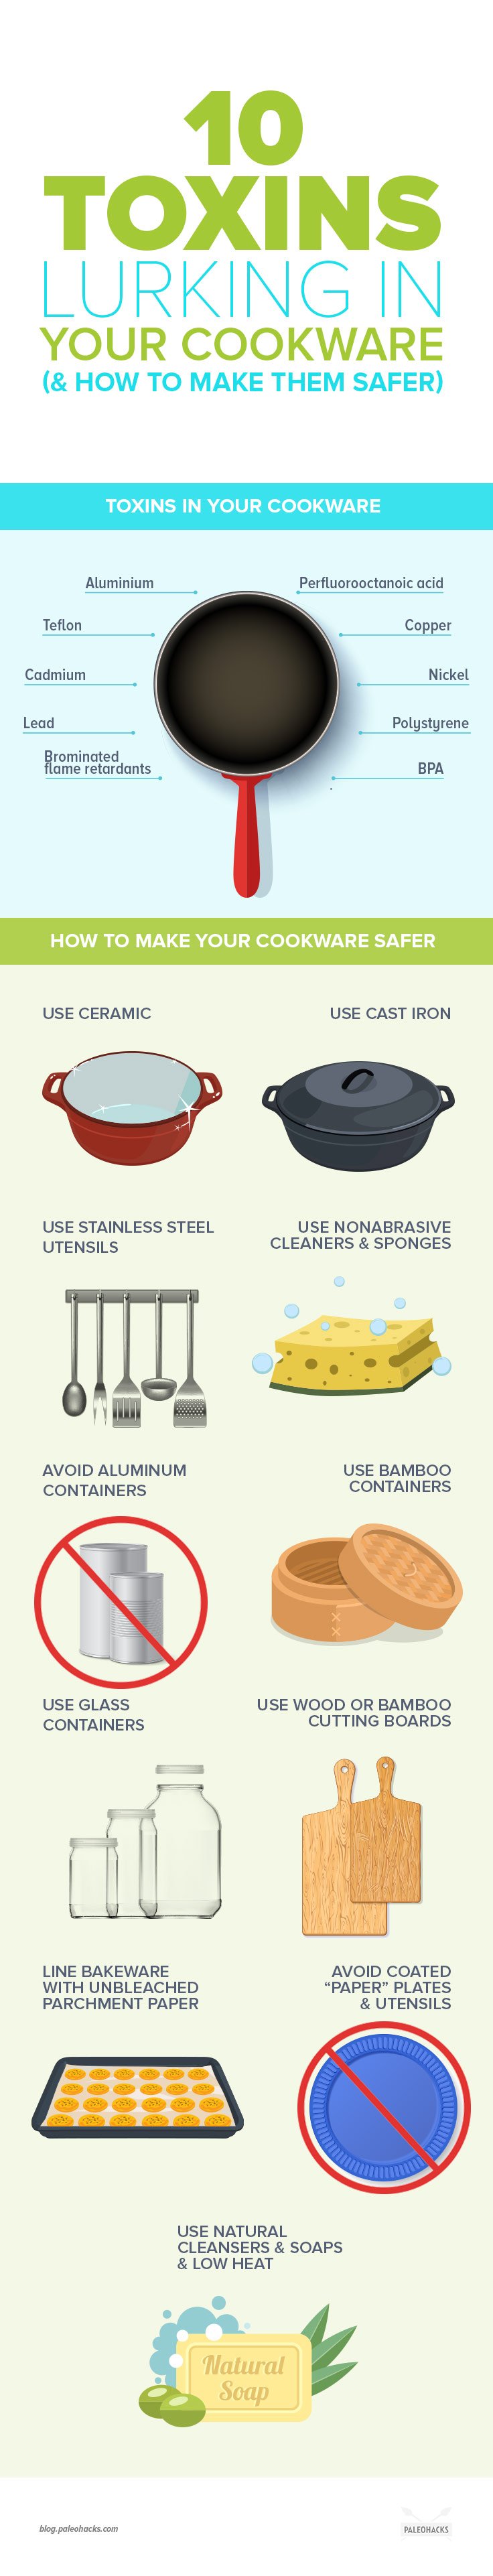 Most pots and pans look and feel the same, but the fact is, some cookware leaches the chemicals they’re manufactured from into the food you’re cooking.